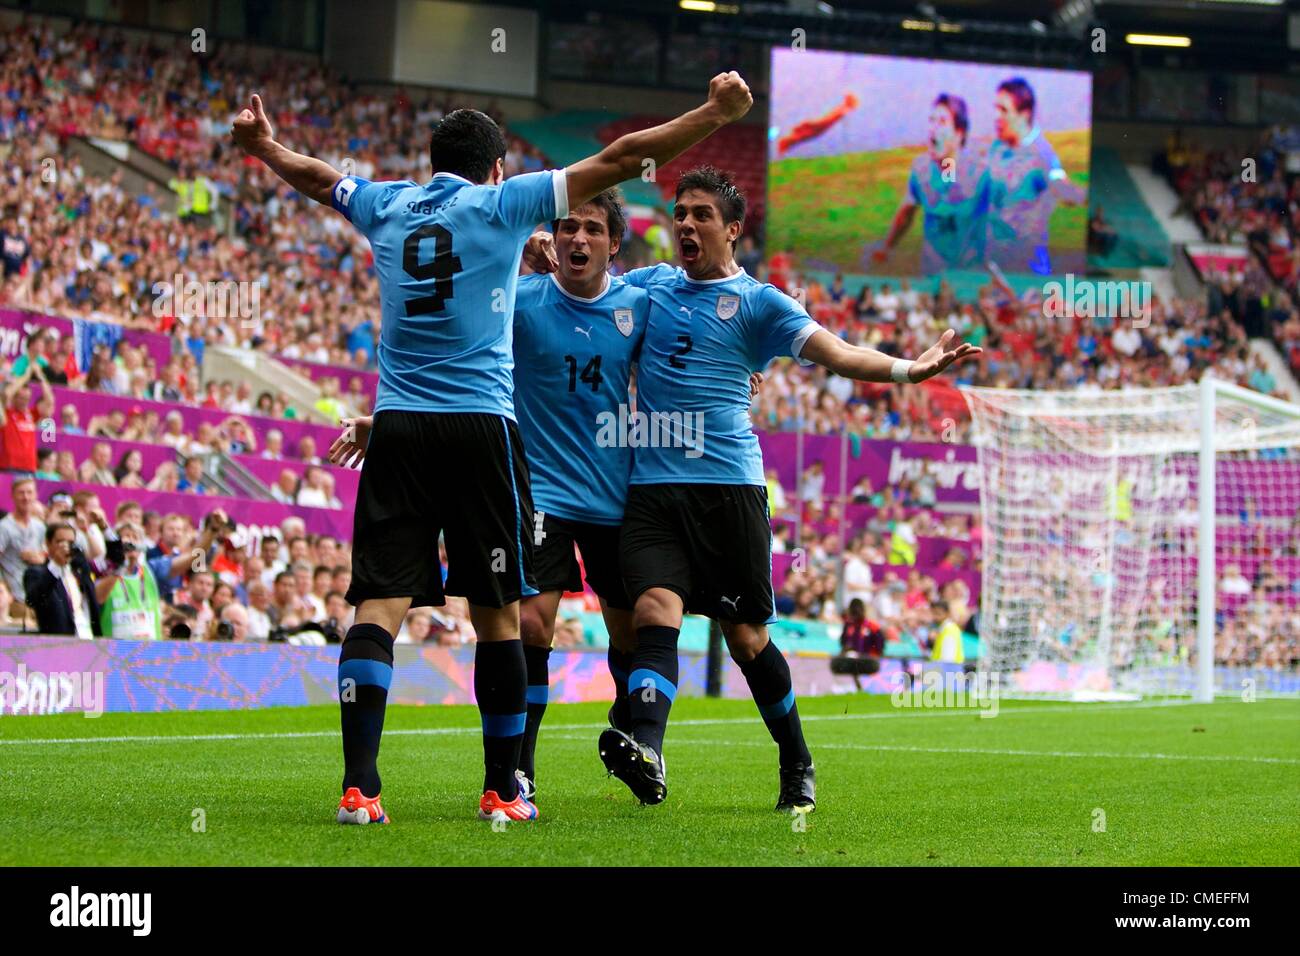 26.07.2012 Manchester, England. Uruguay midfielder Nicolás Lodeiro celebrates his goalduring the first round group A mens match between United Arab Emirates and Uruguay at Old Trafford. Stock Photo